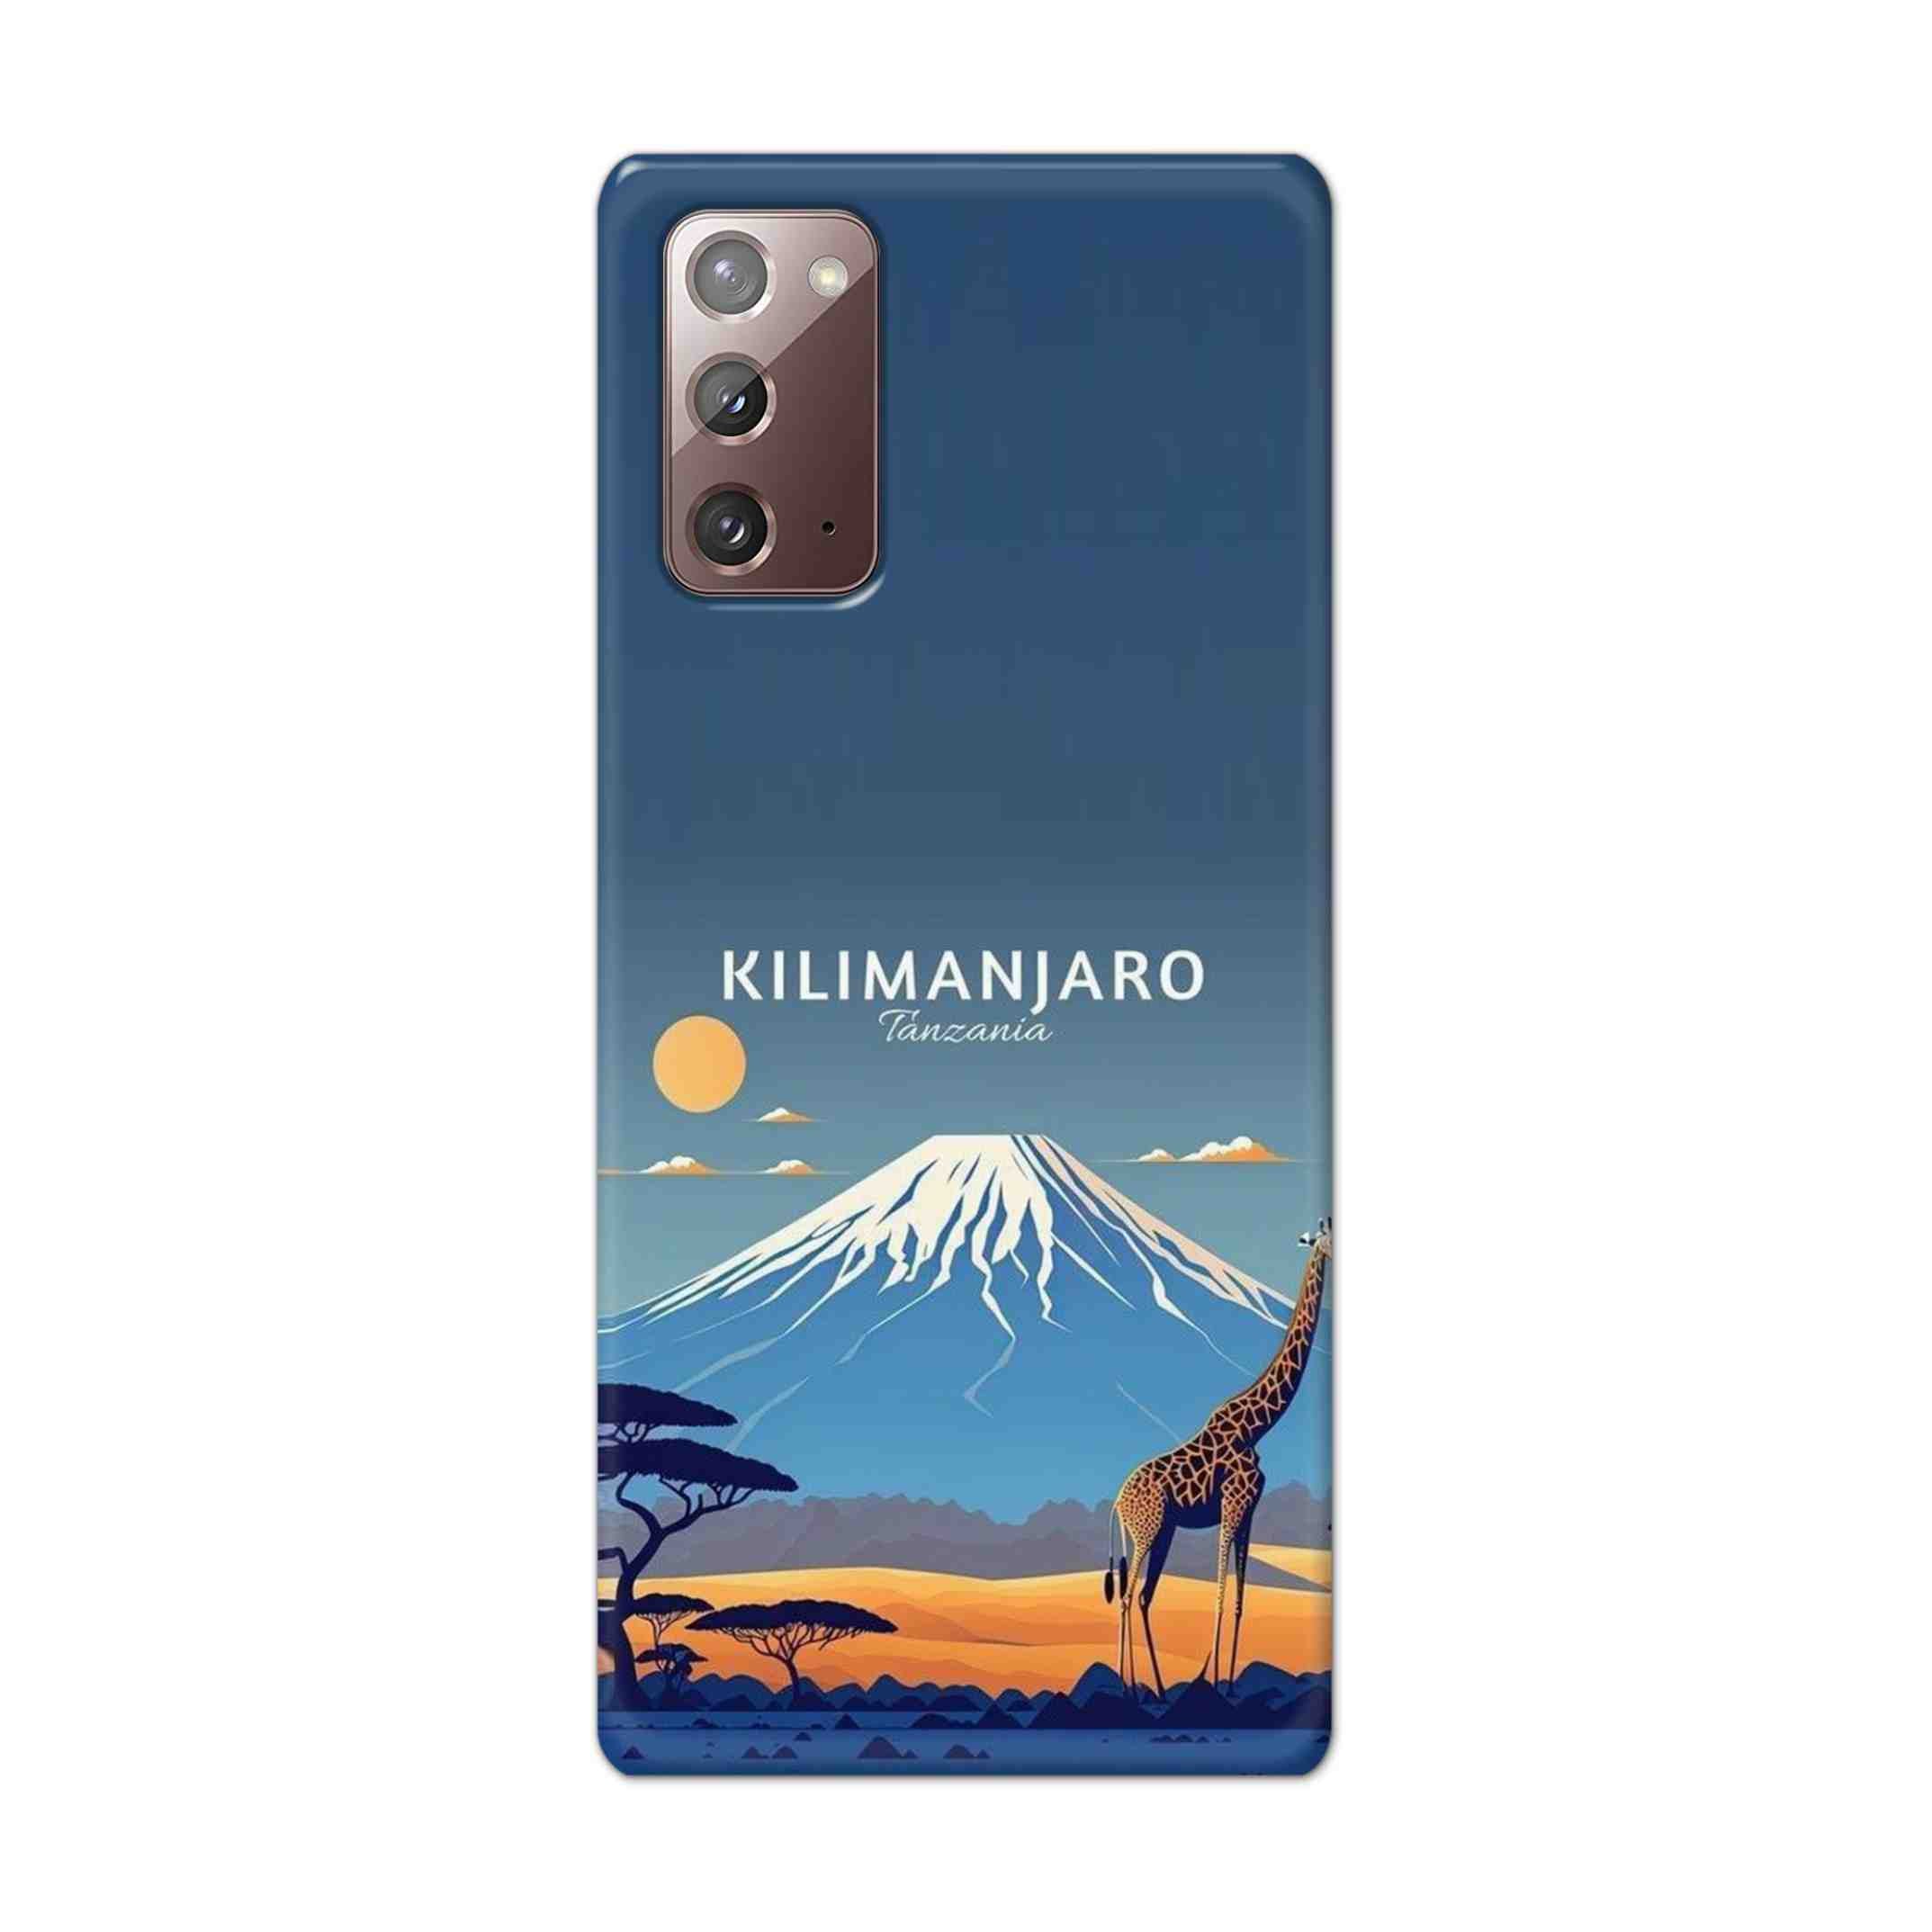 Buy Kilimanjaro Hard Back Mobile Phone Case Cover For Samsung Galaxy Note 20 Online